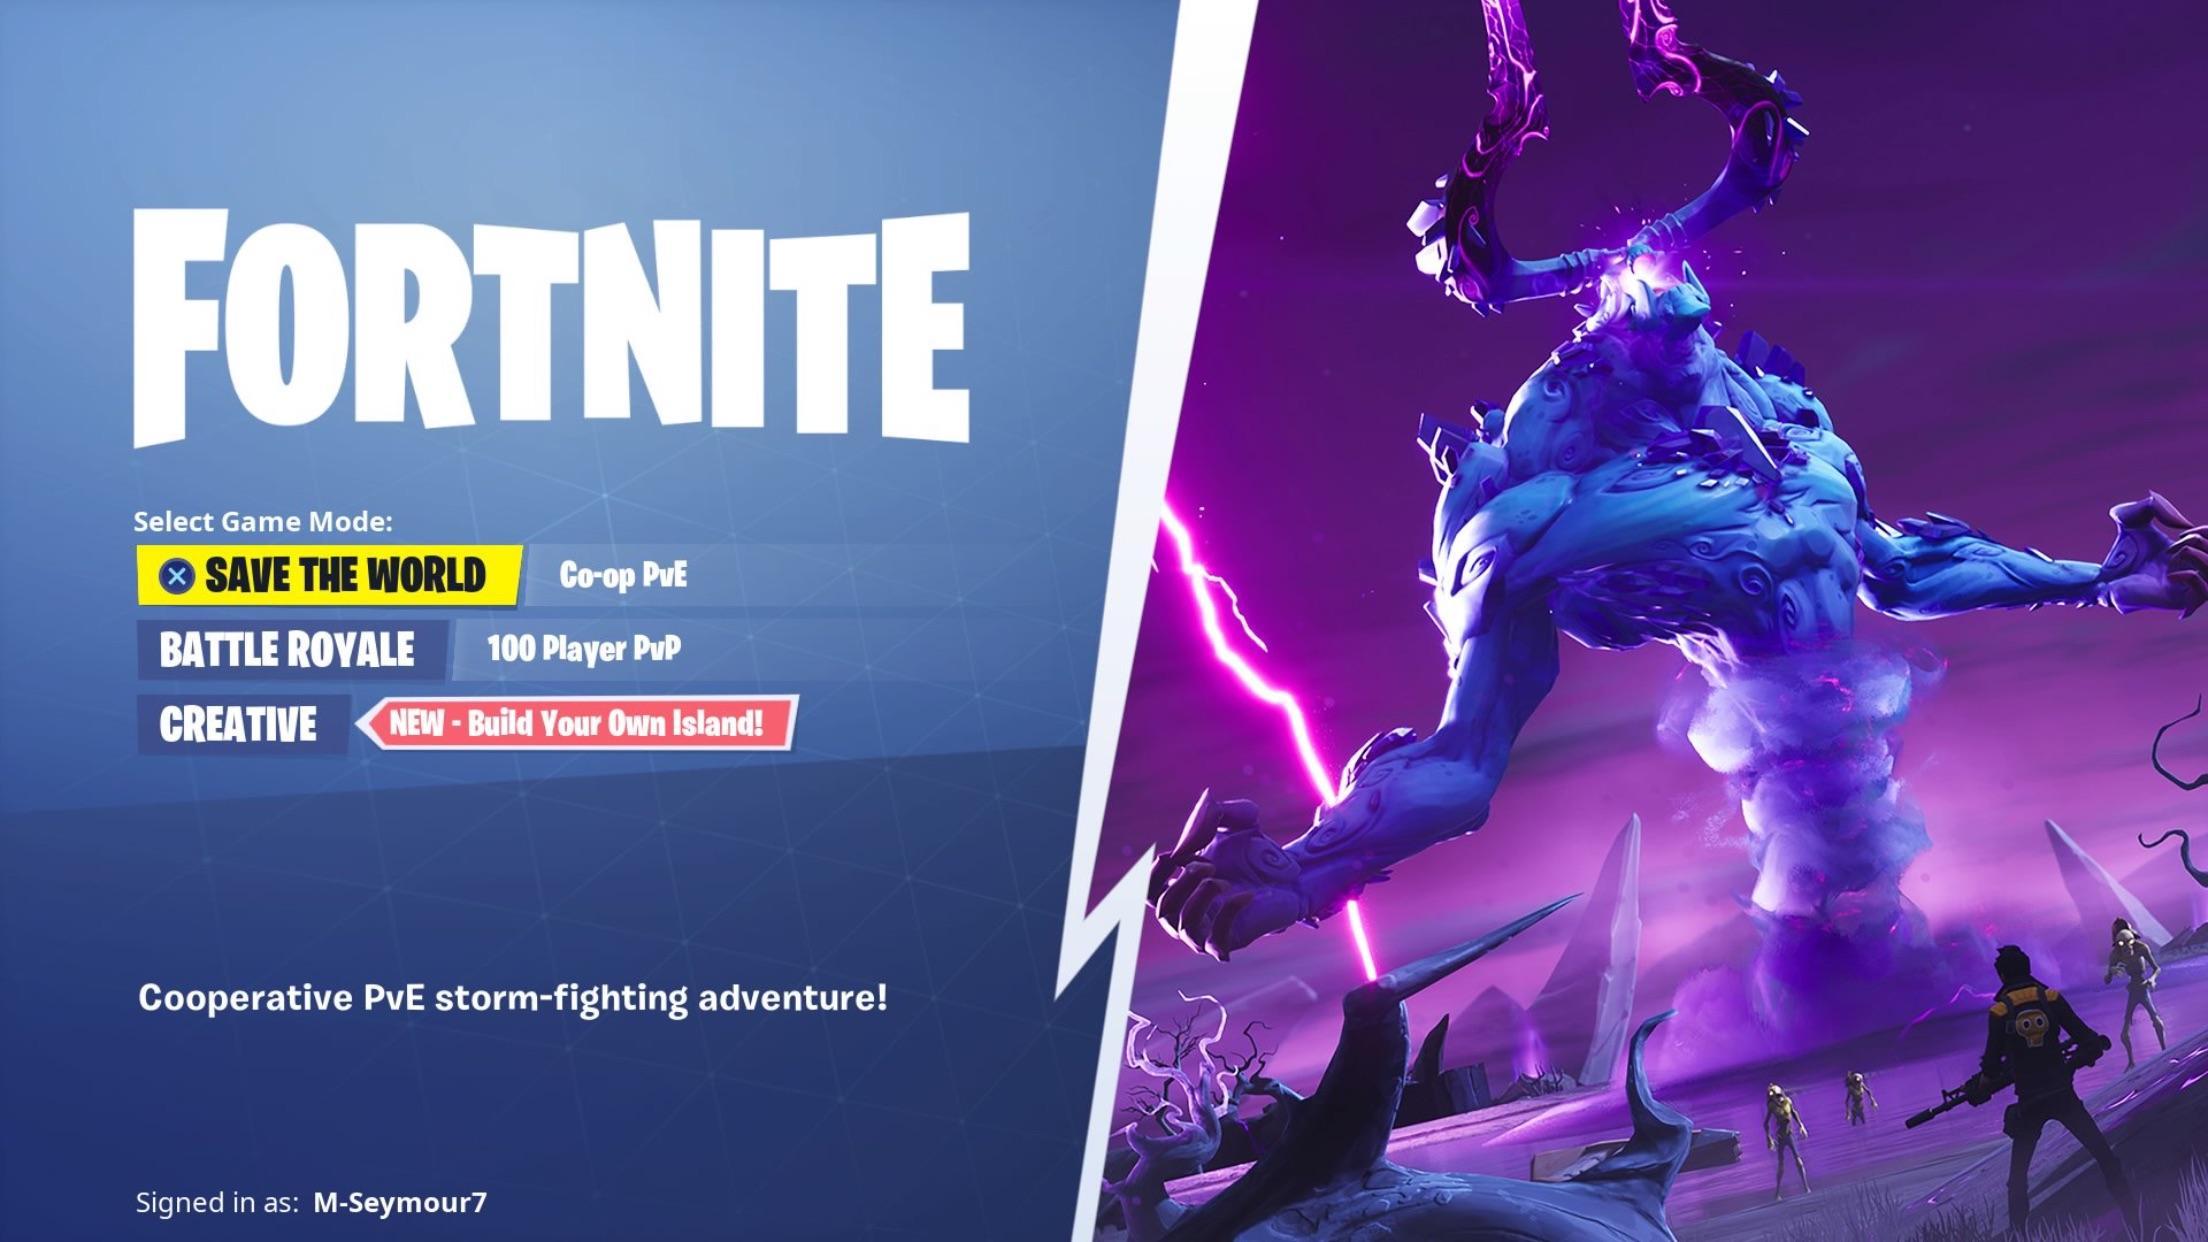 New STW title screen! (Storm king)